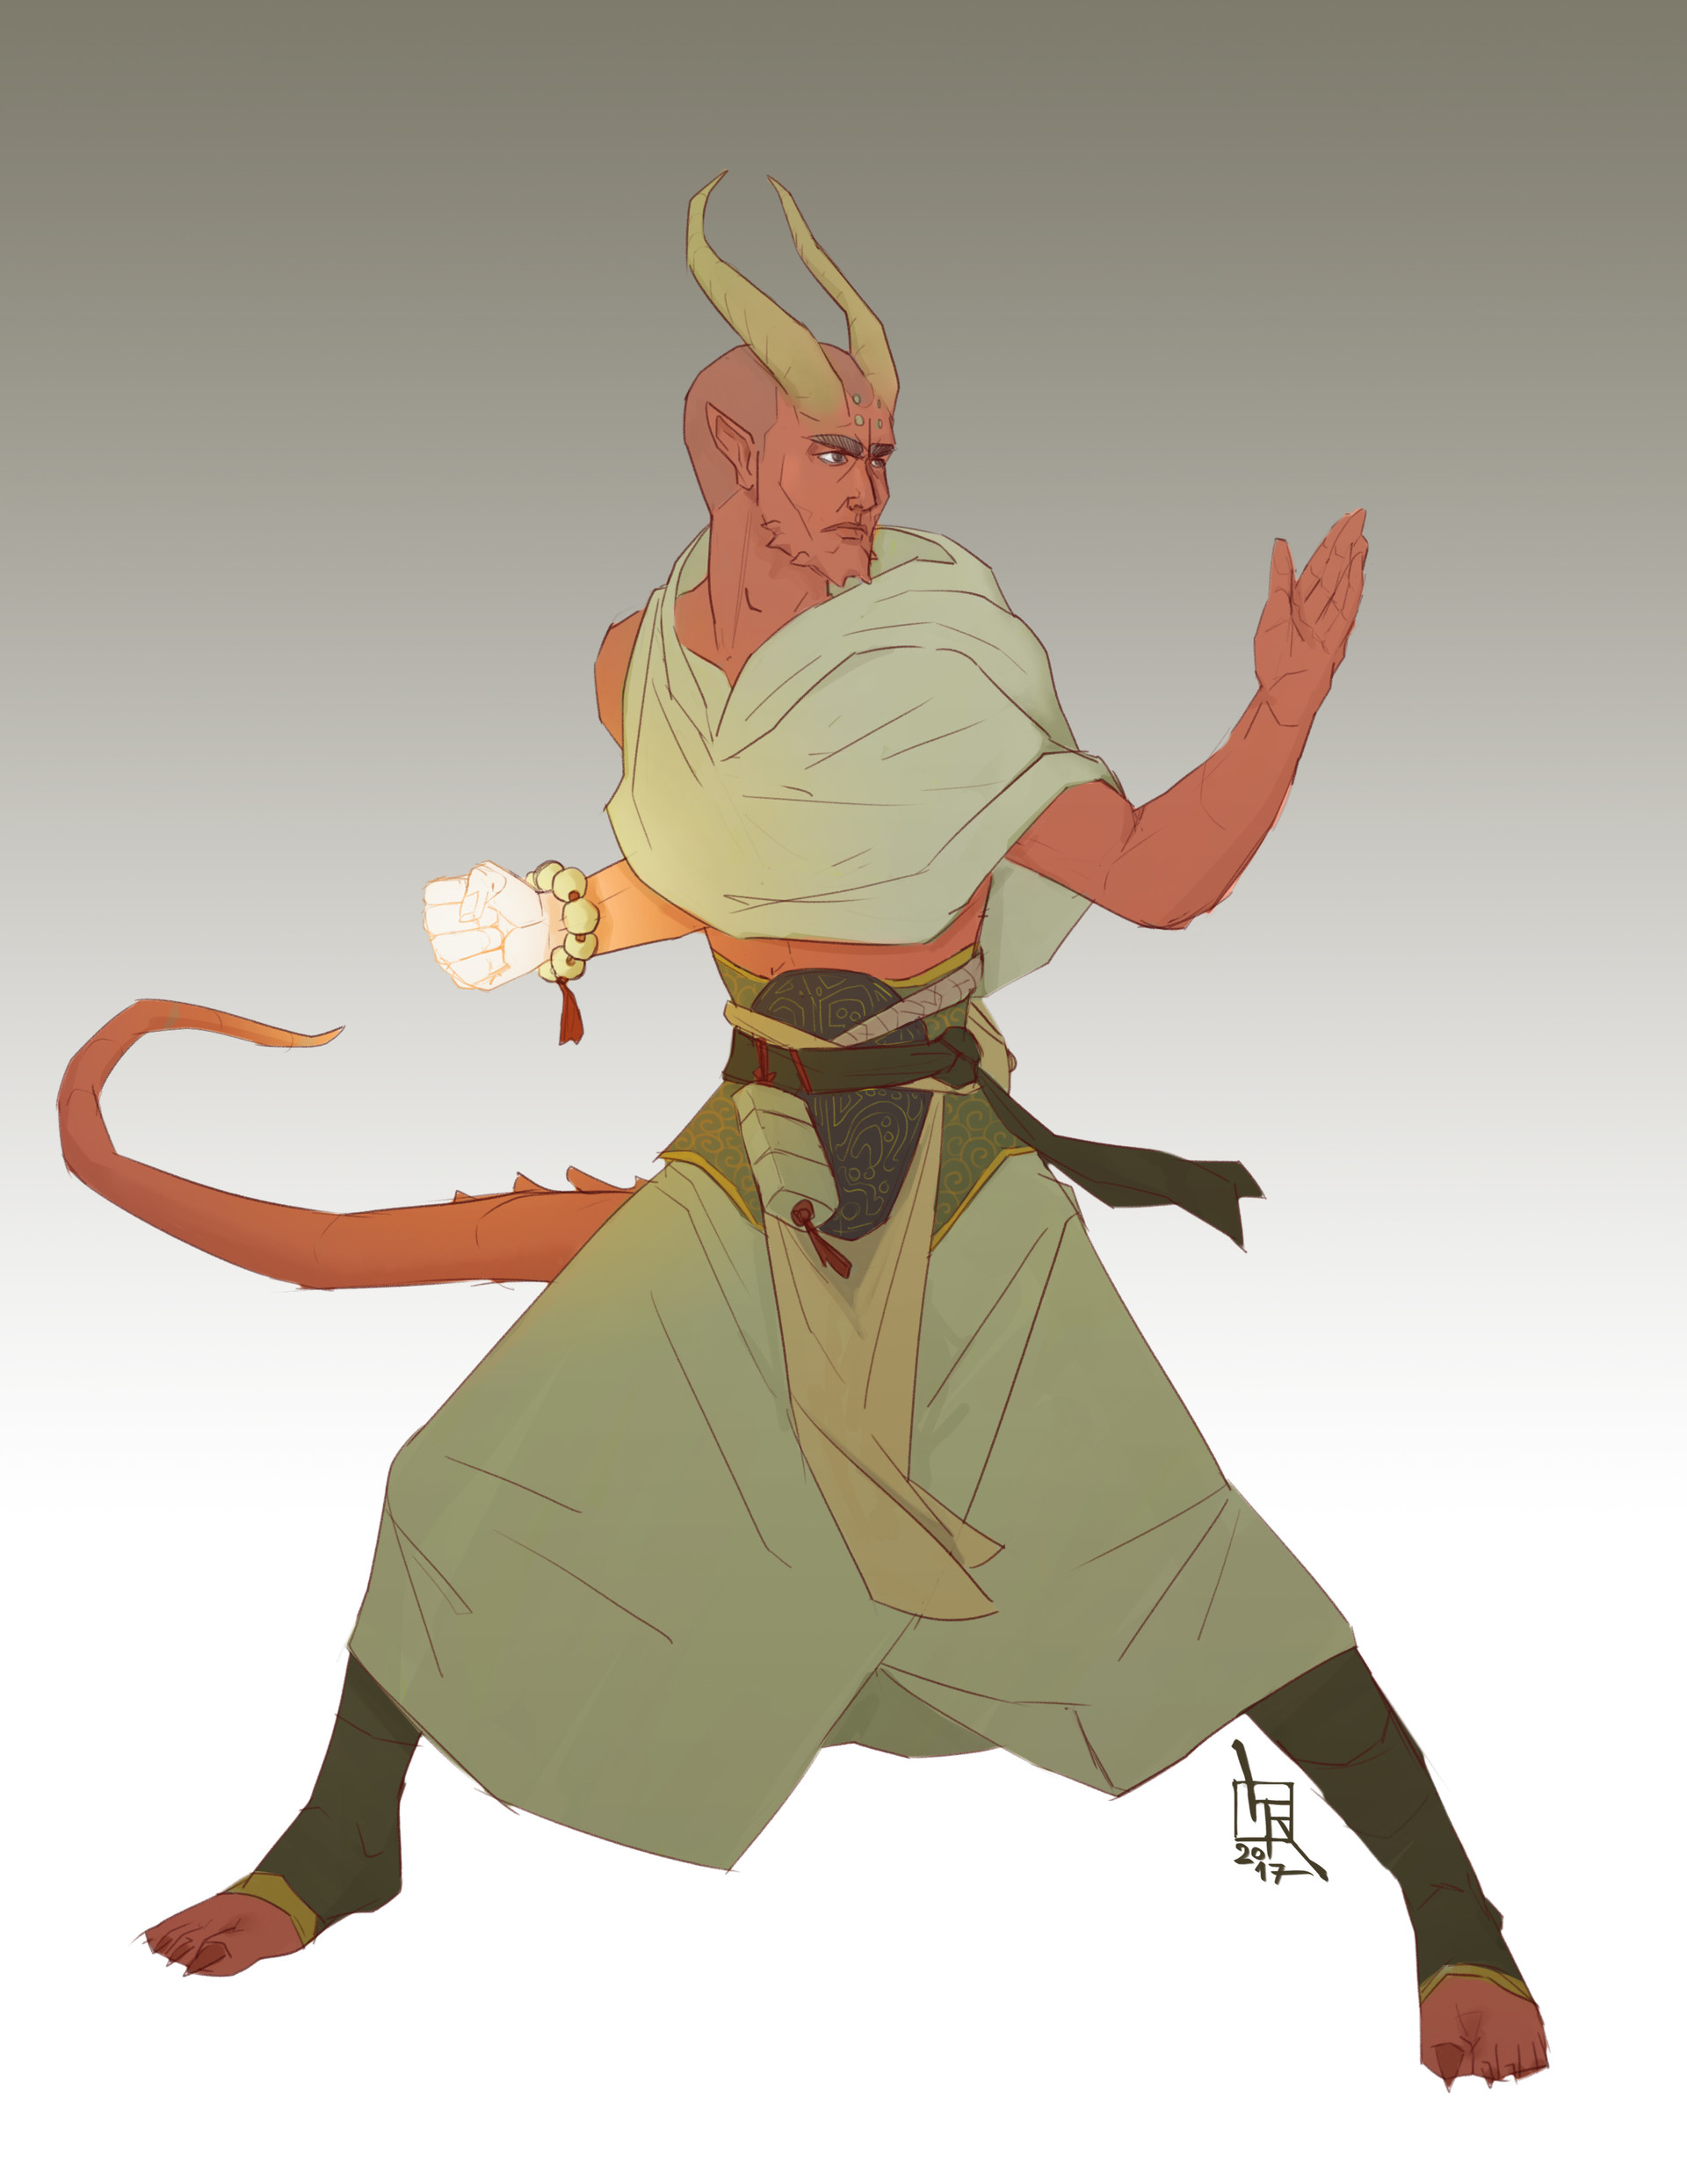 Tiefling Monk, done by request during my livestream on picarto.tv.